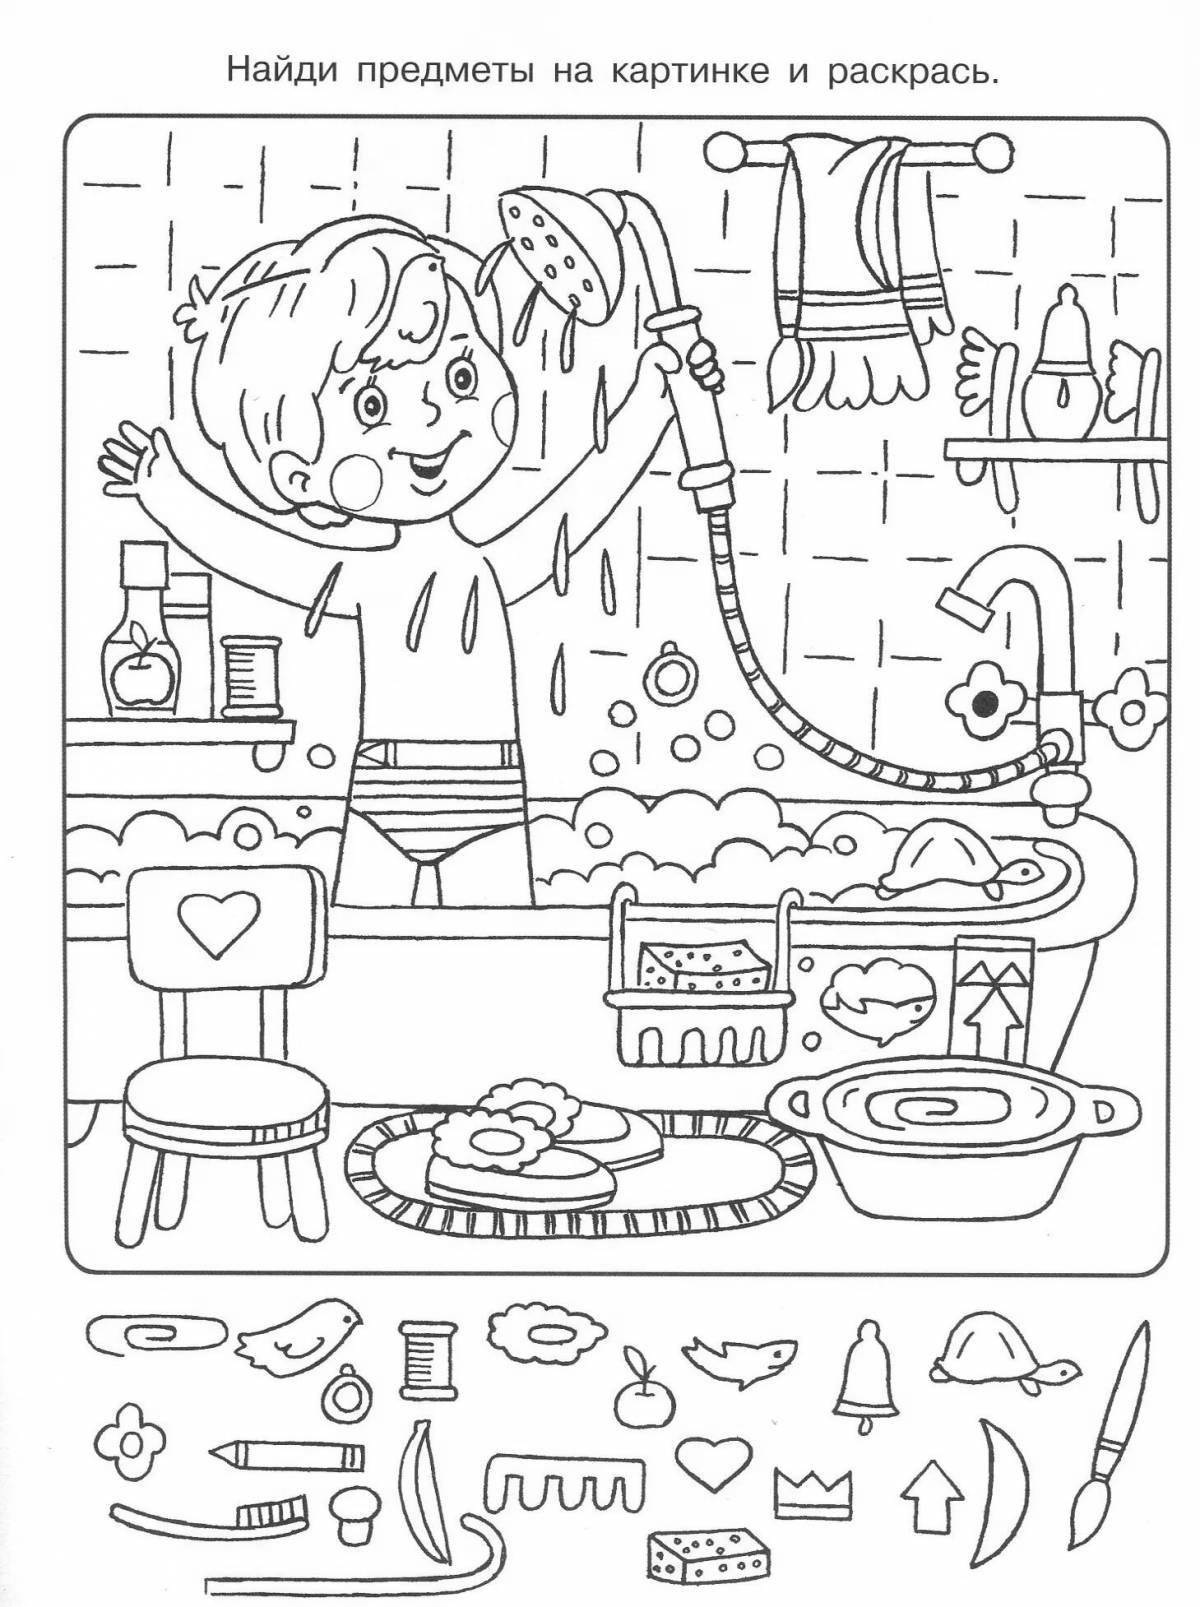 Attention-grabbing coloring book